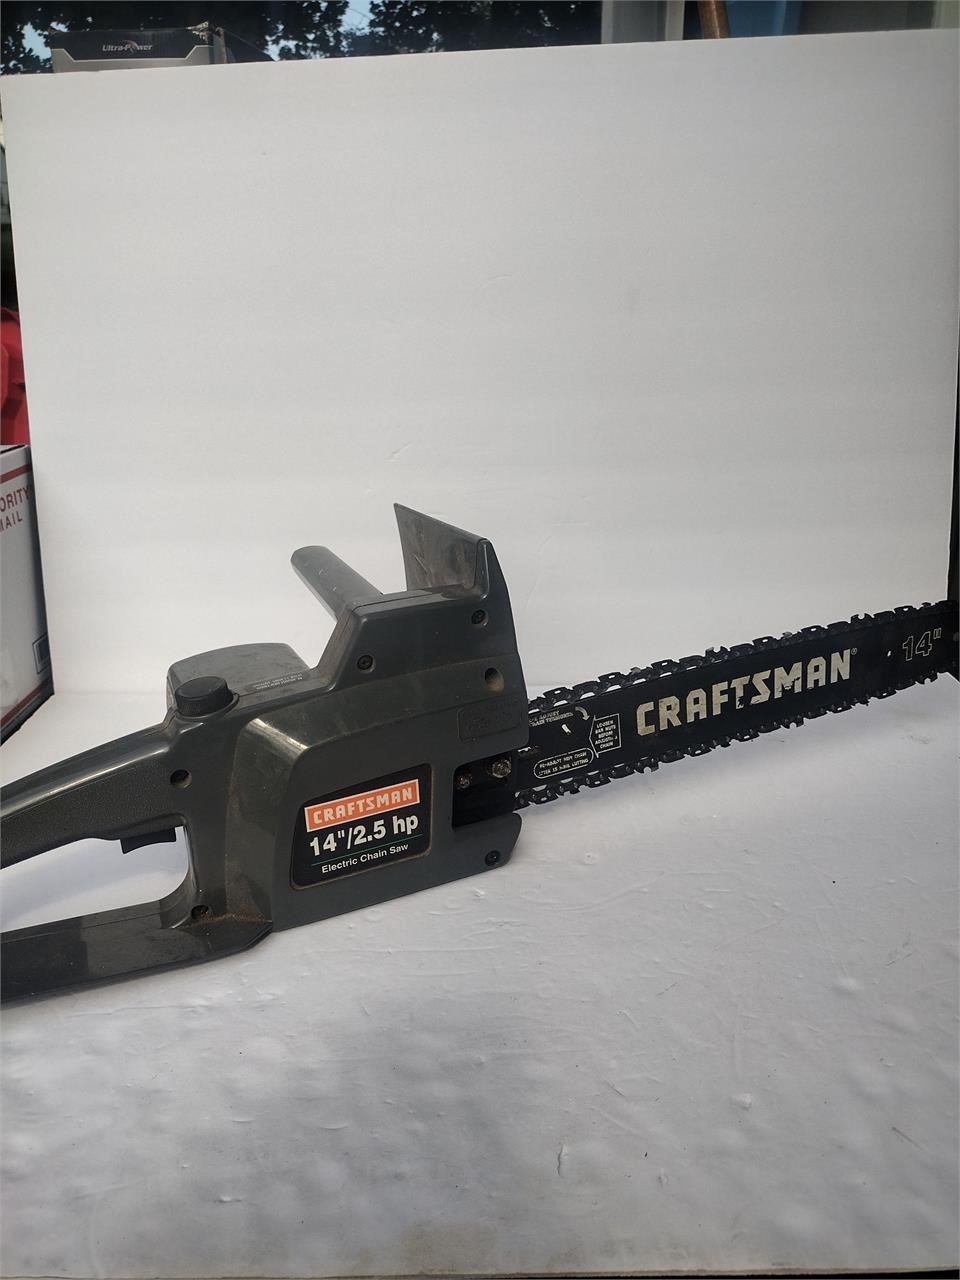 Craftsman 14" Electric Chainsaw